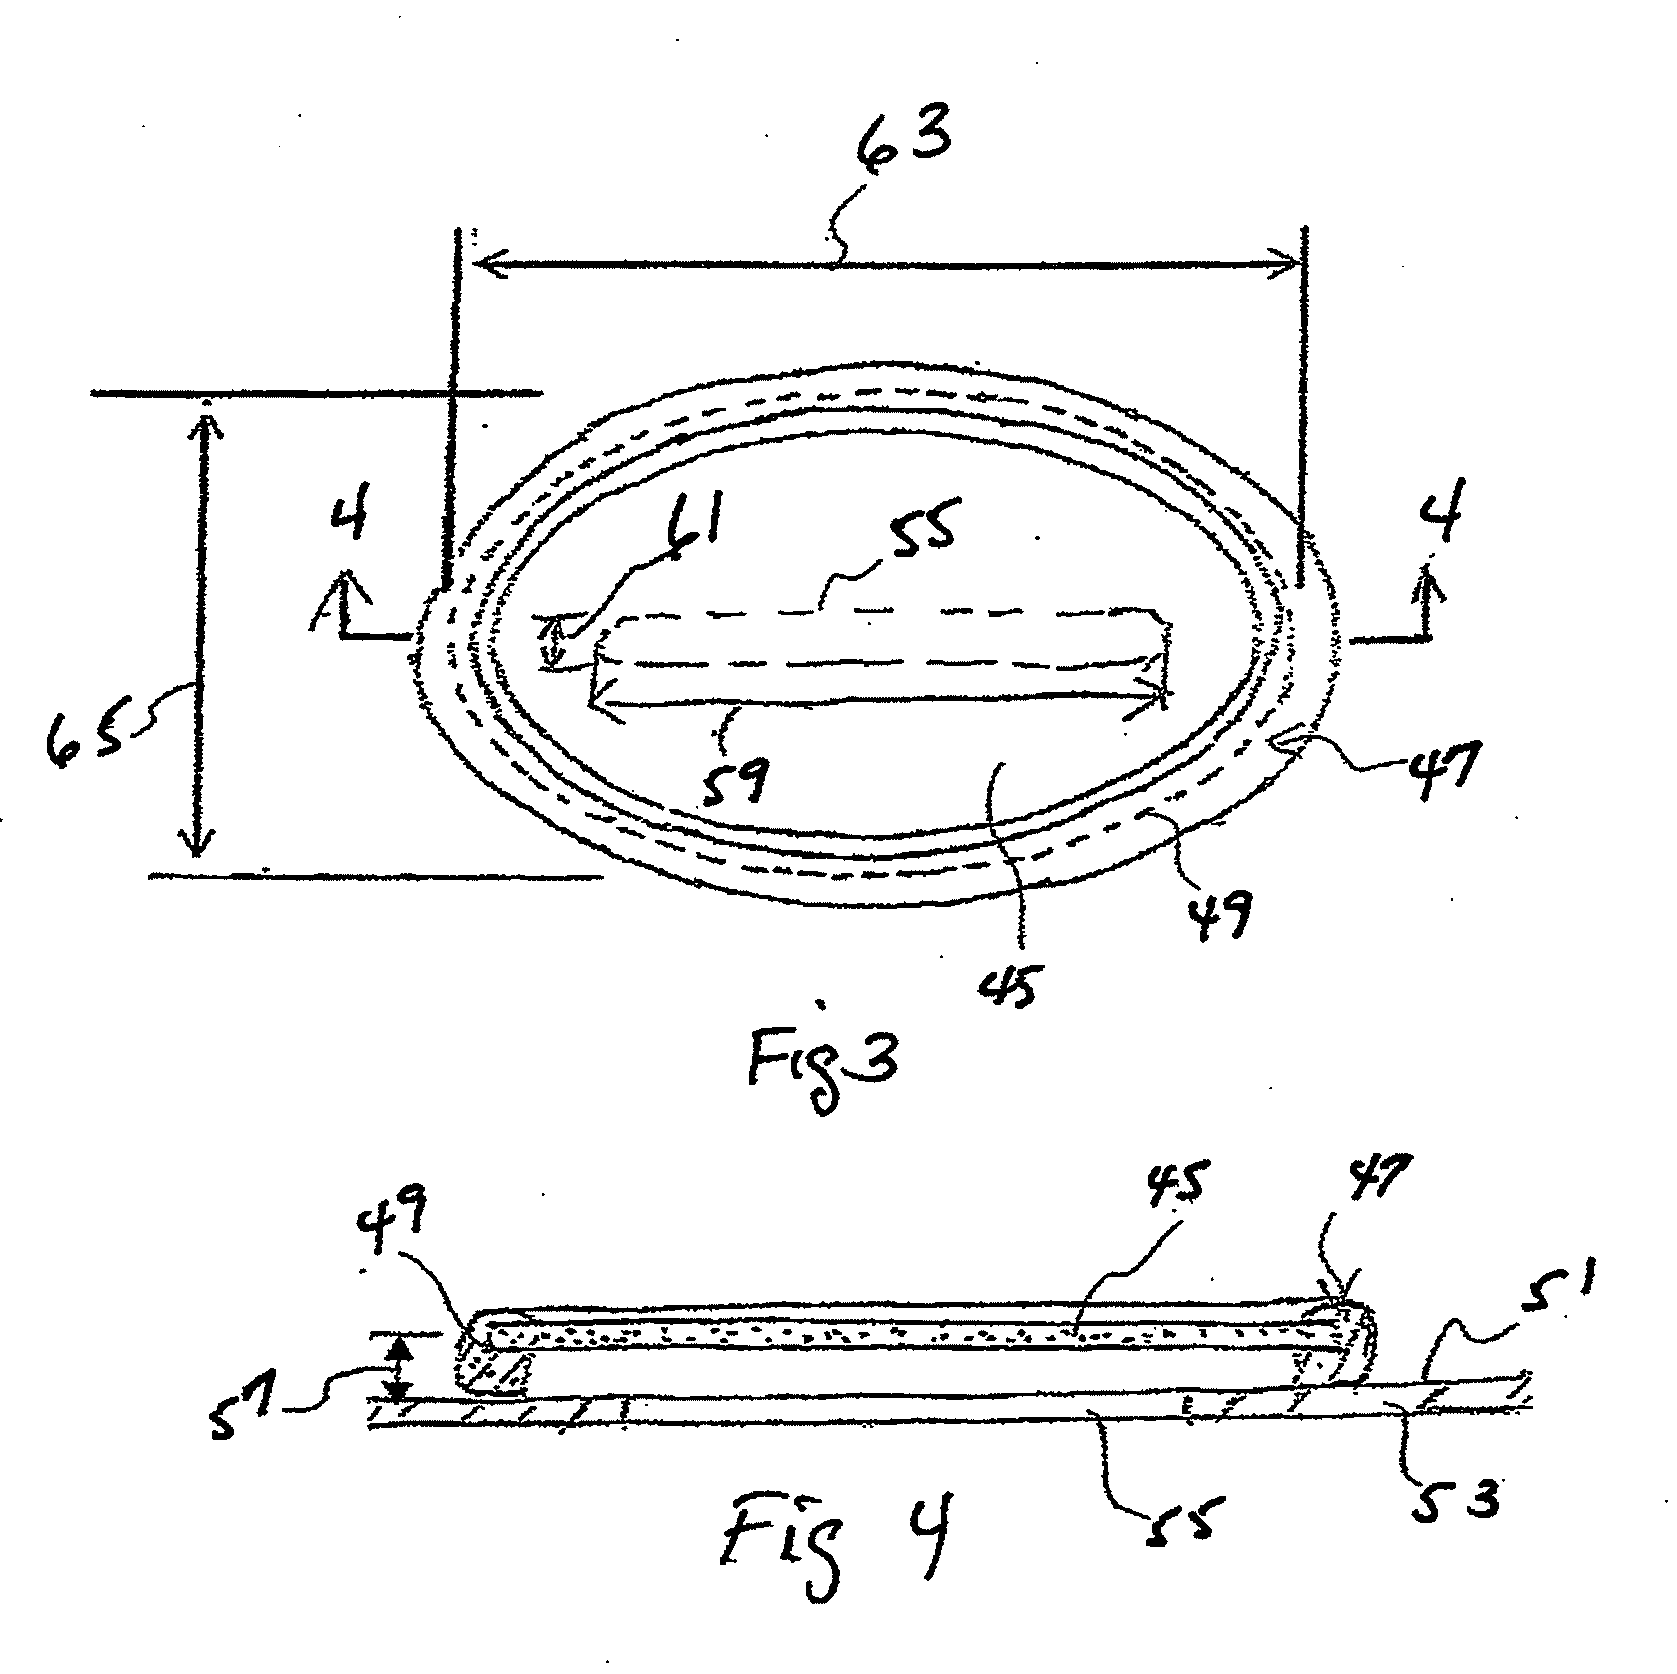 Antenna cover for microwave ovens